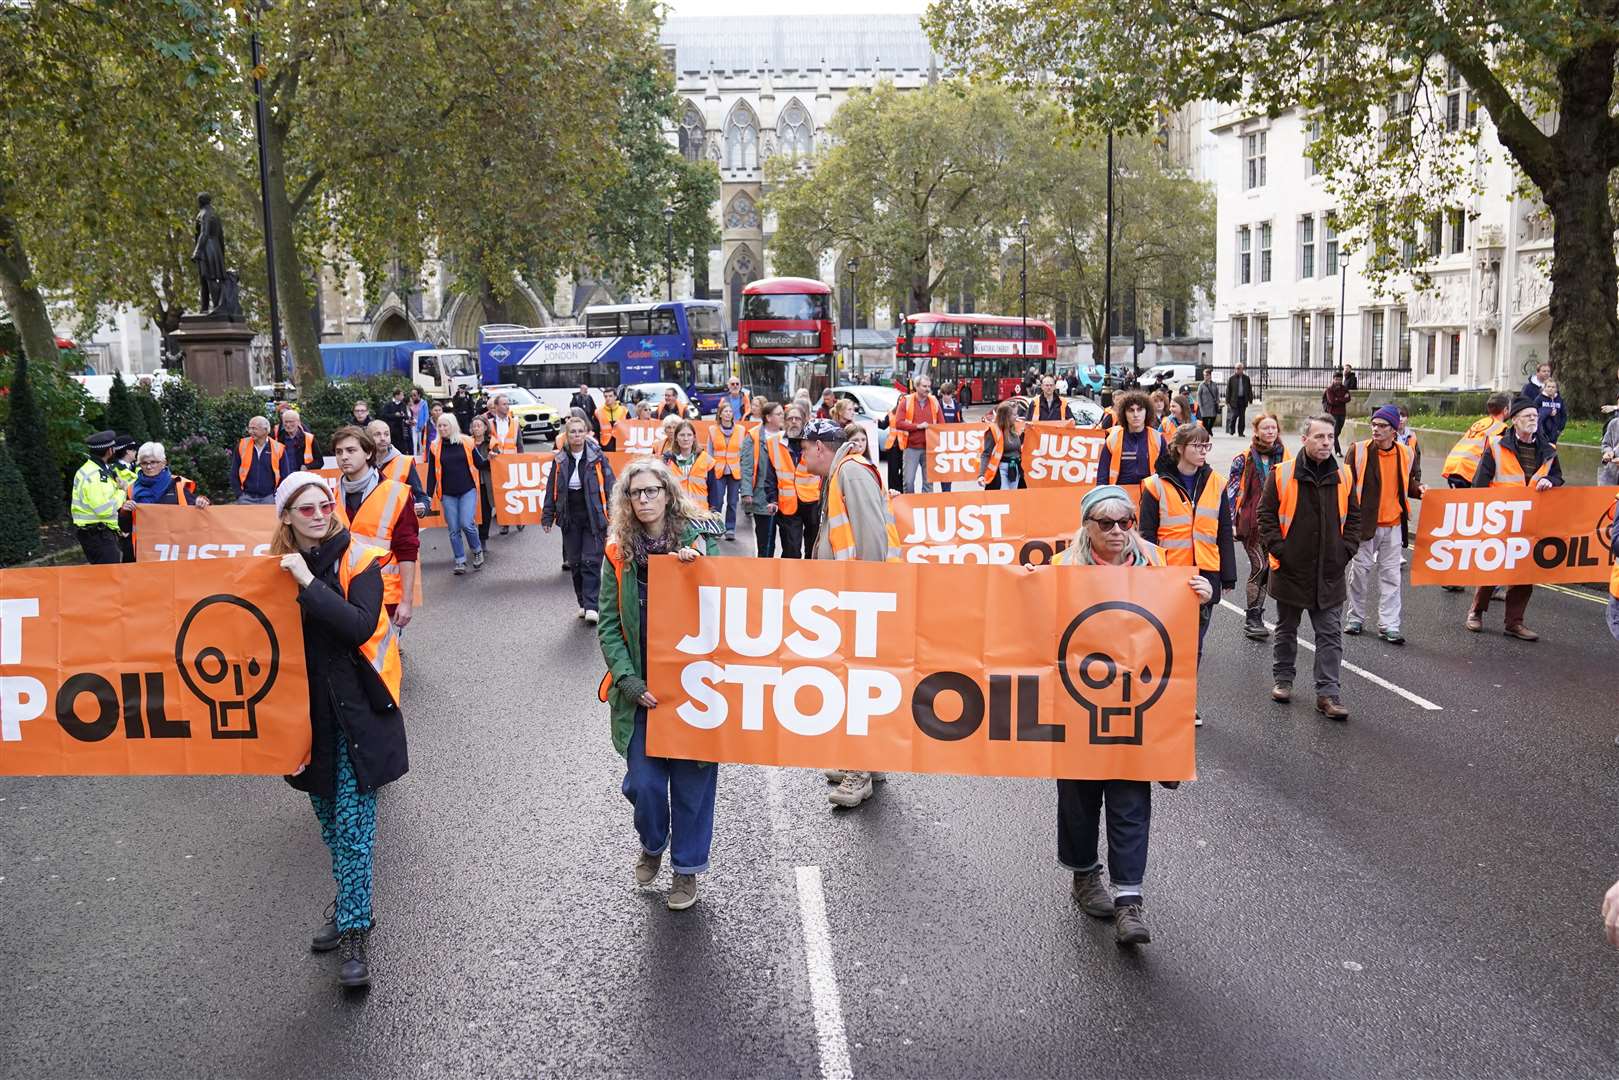 Just Stop Oil activists demonstrate in Parliament Square to demand the government immediately halt all new oil, gas and coal projects in the UK (Stefan Rousseau/PA)